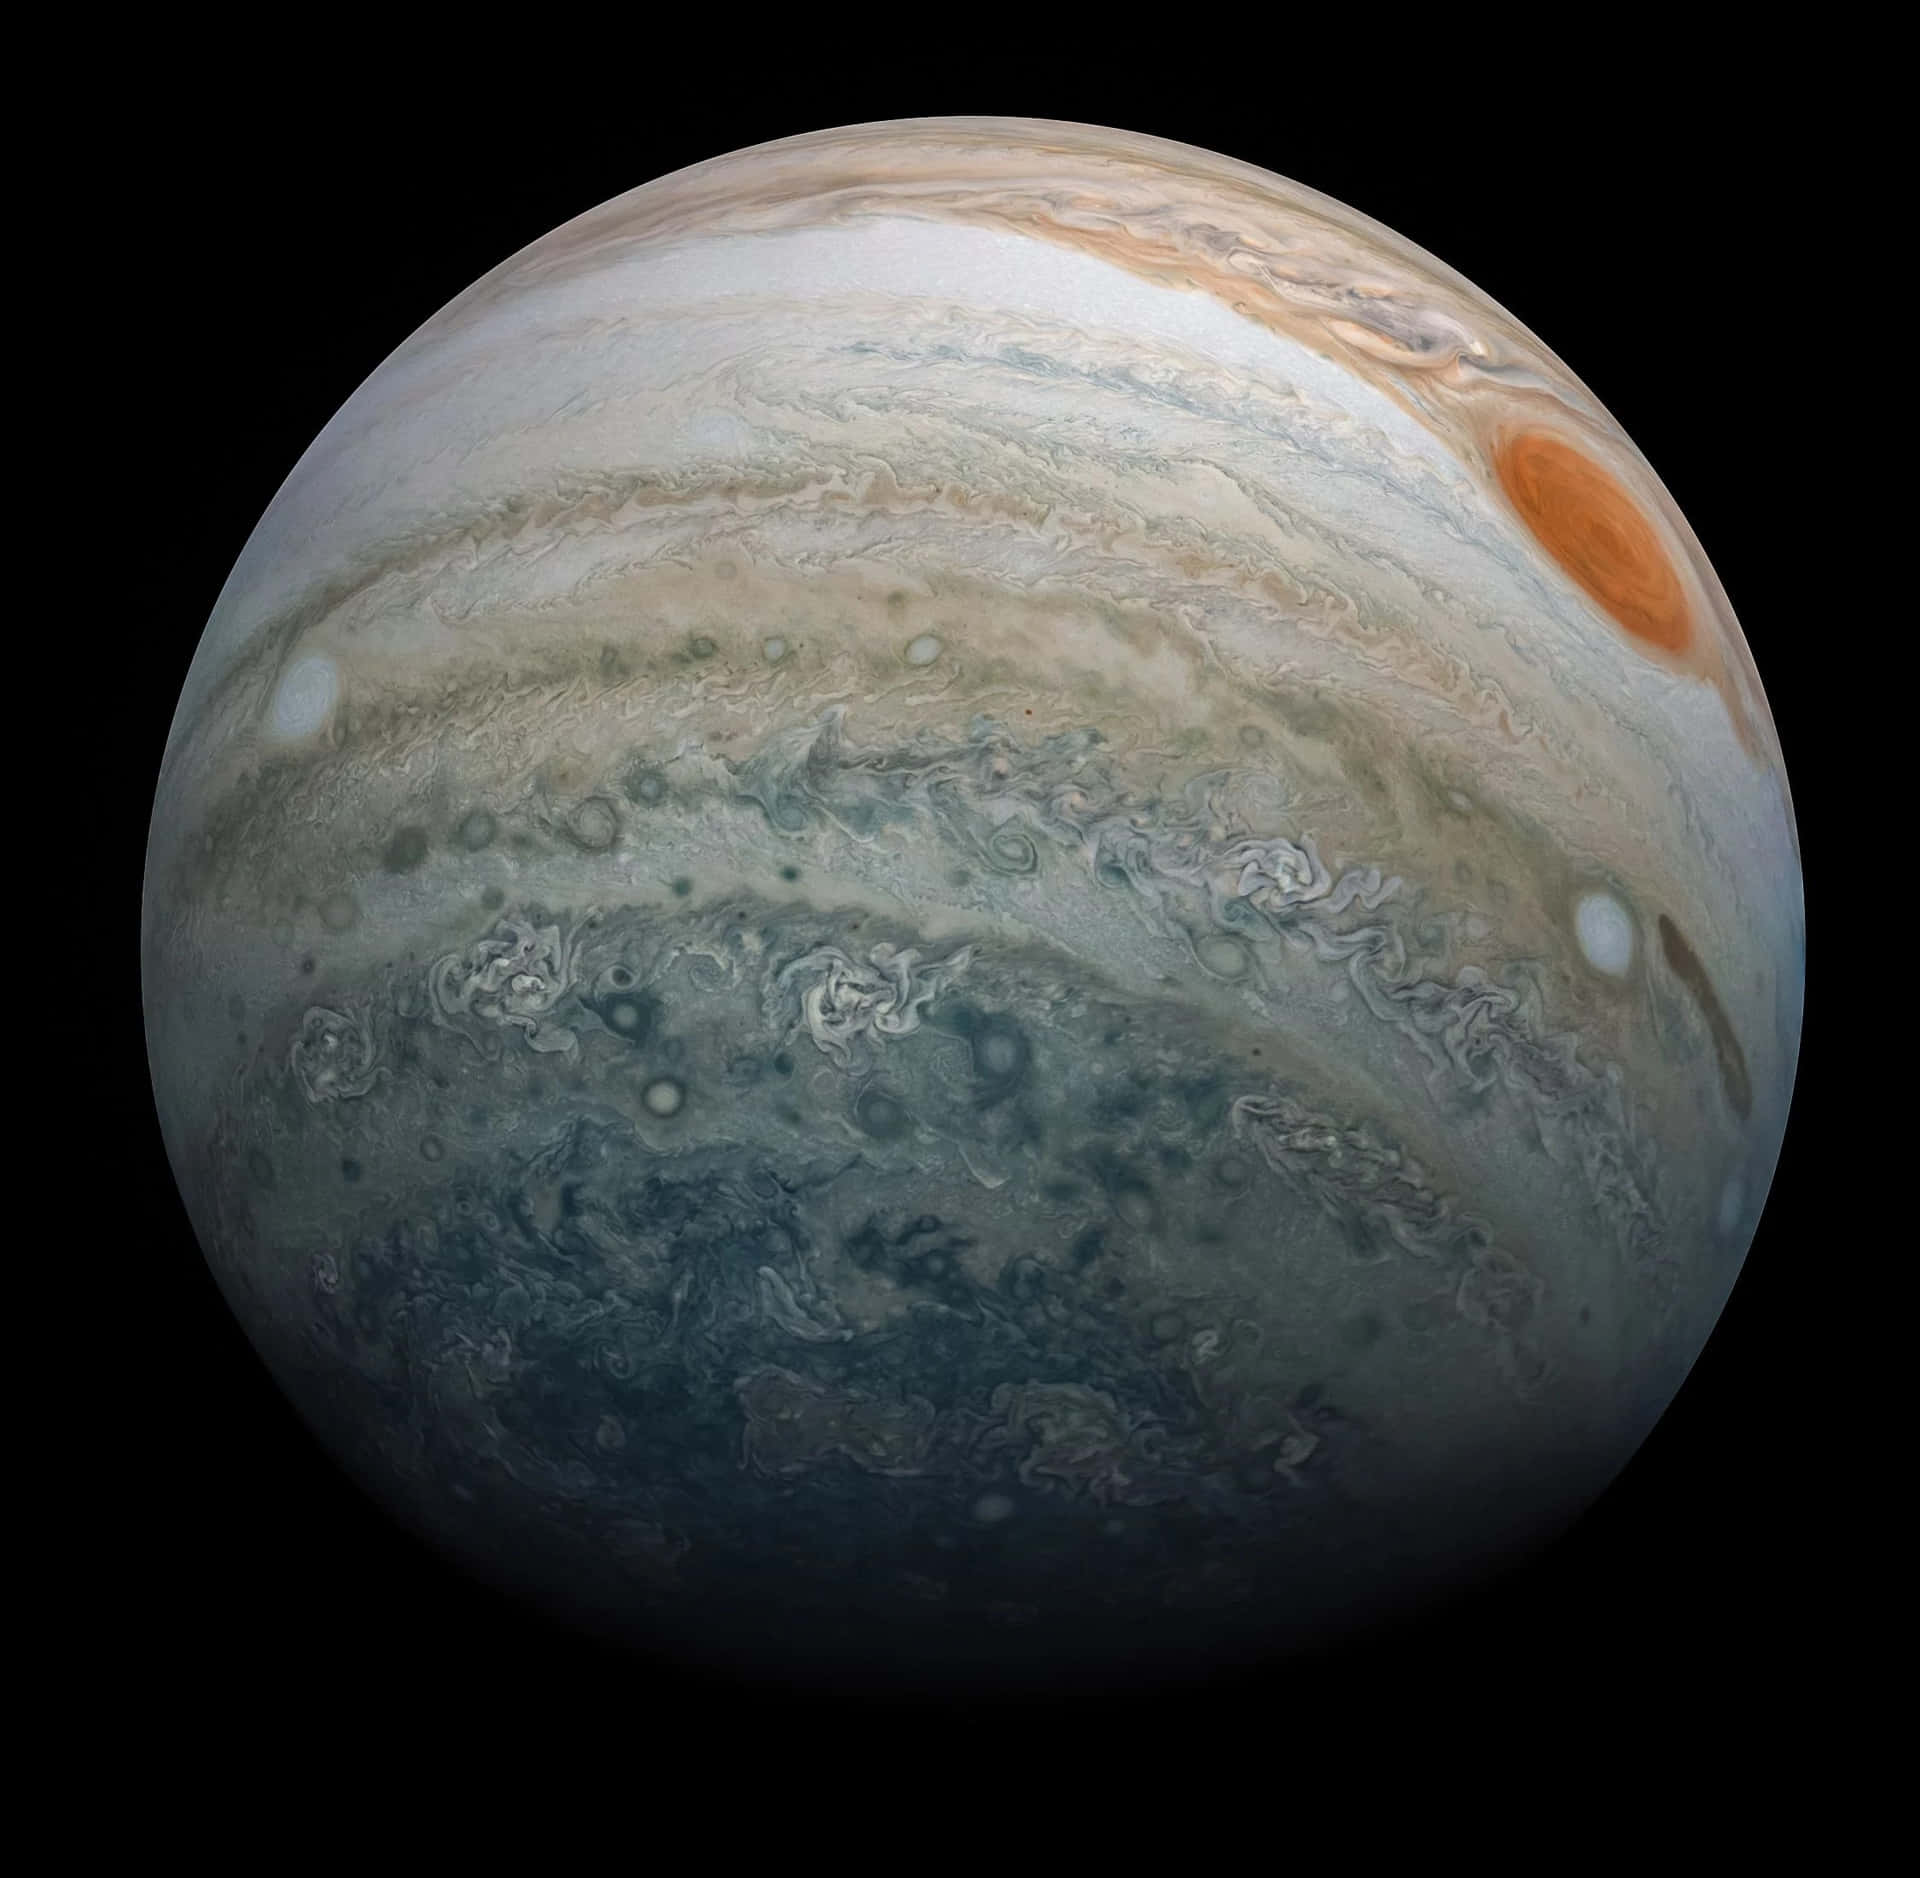 Jupiter Is Shown In This Image